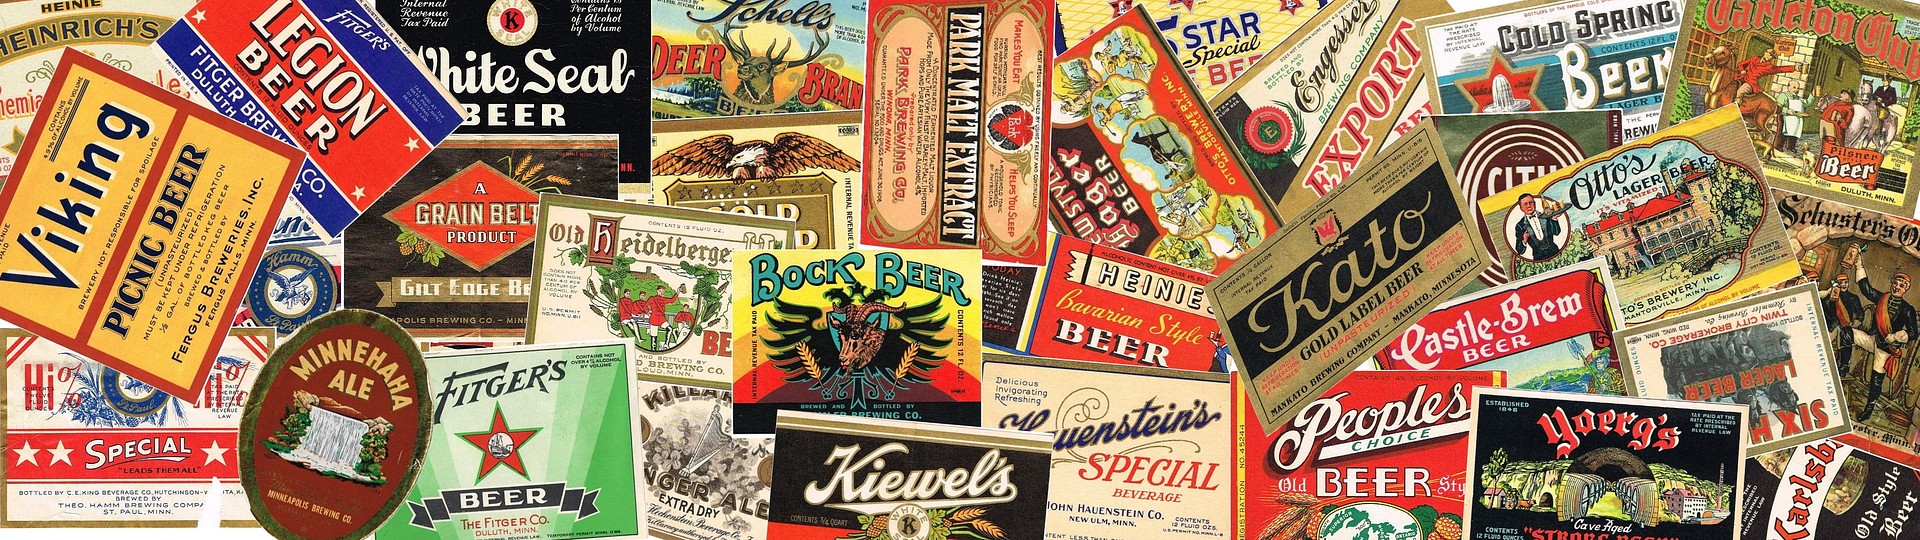 TavernTrove's Vintage Minnesota Beer Labels Auction by TavernTrove